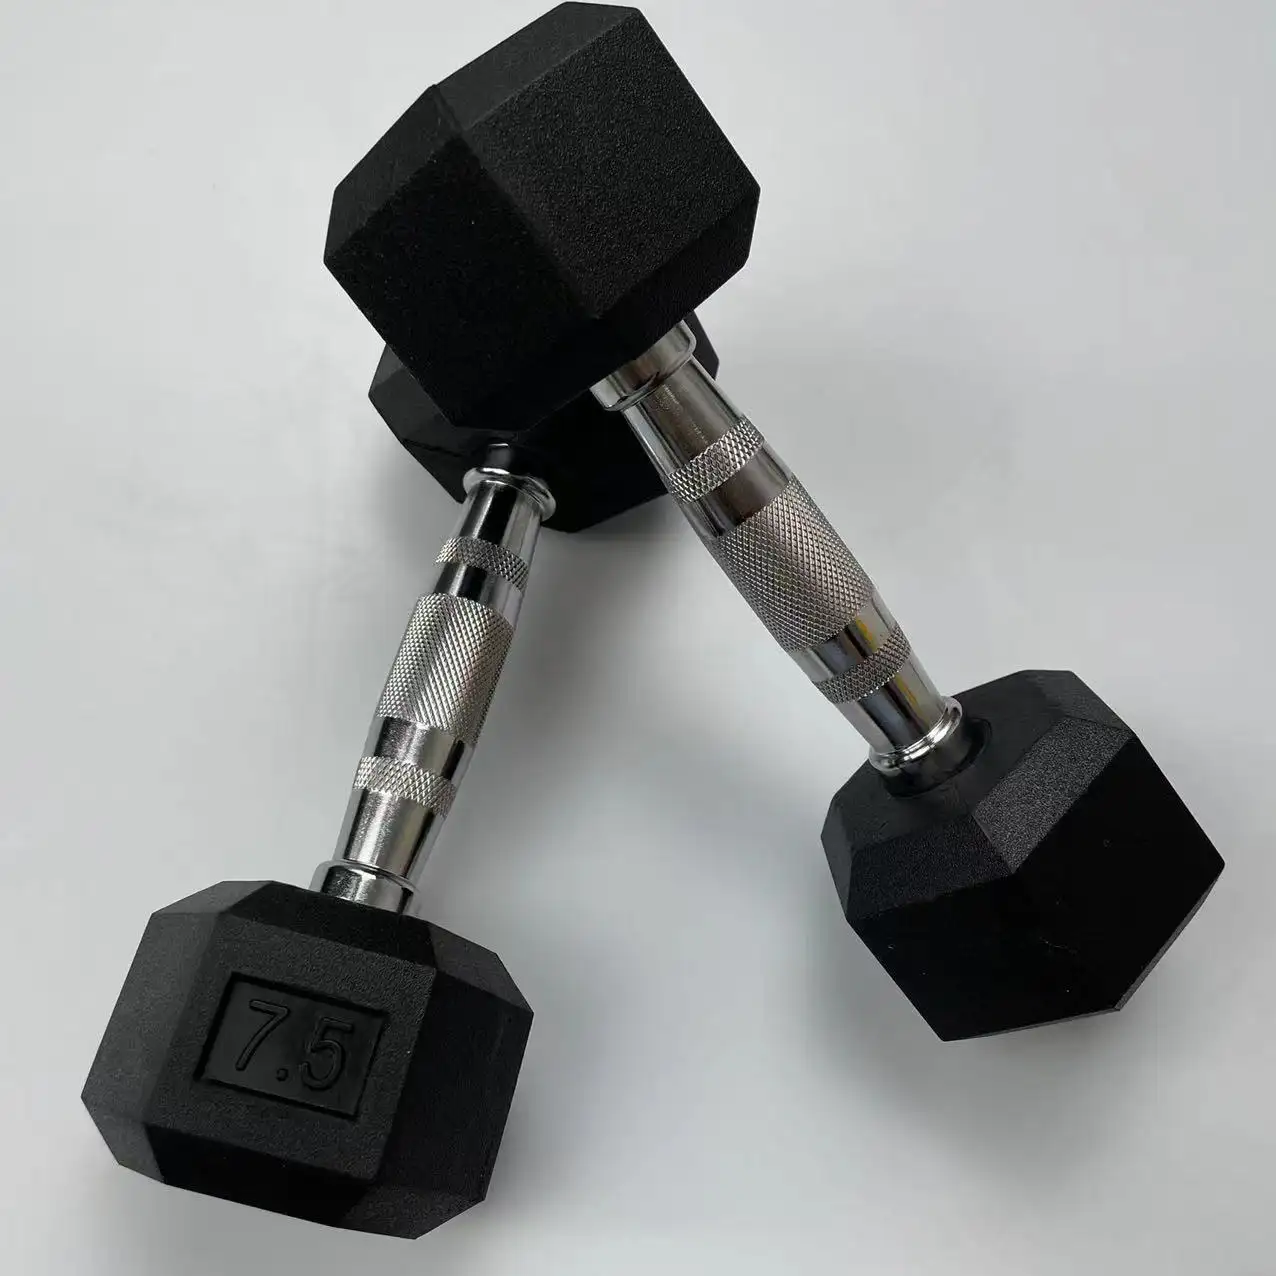 Factory supplied Cheap Hex Rubber Dumbbell Cheap Hex Rubber Coated Dumbbell Set Strength Training Cheap Dumbbell